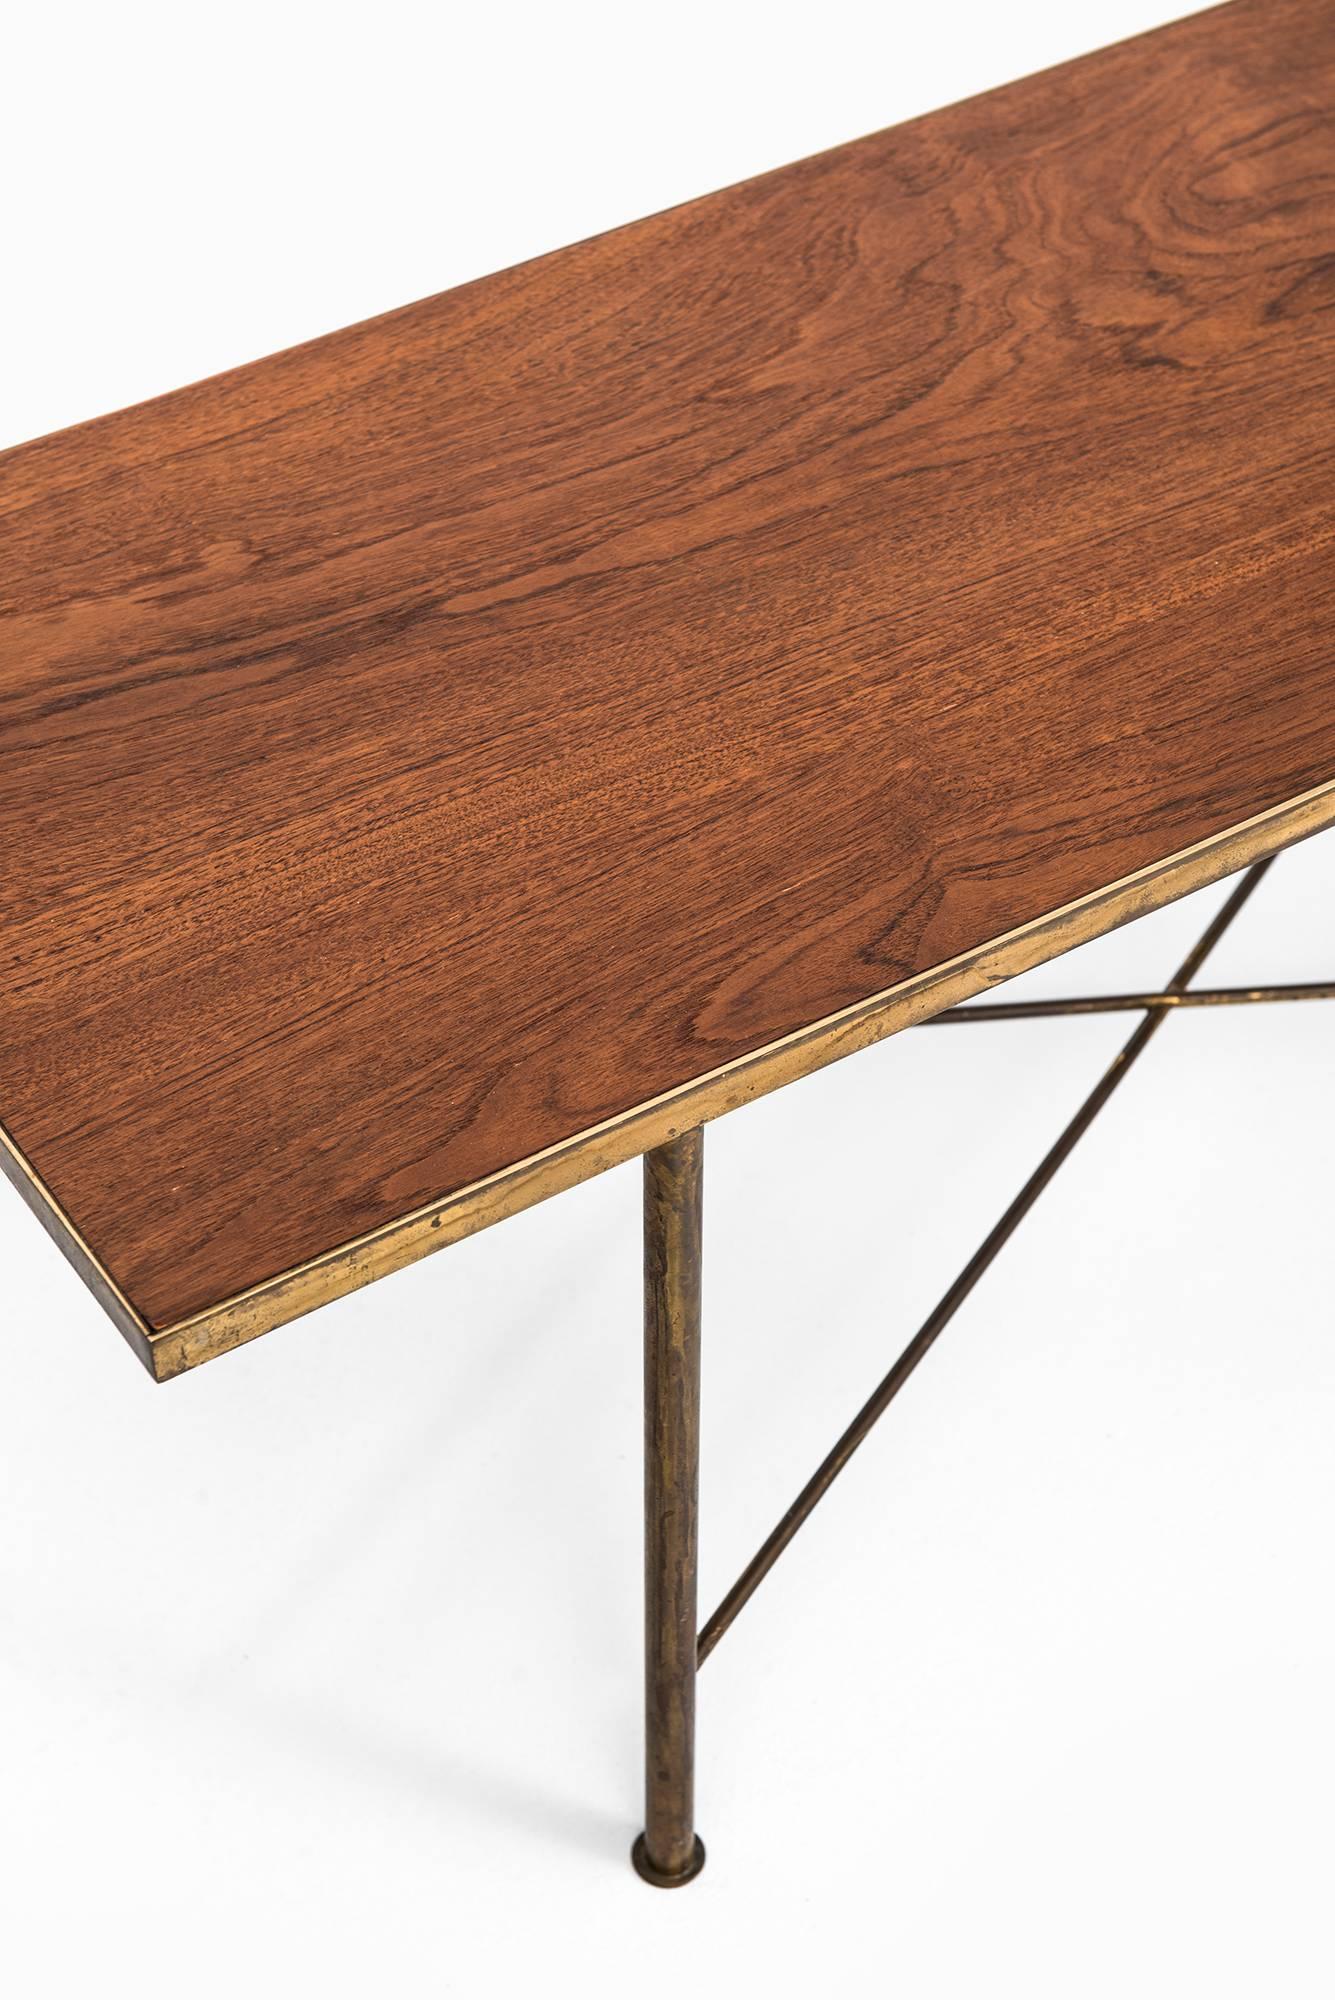 Danish Frode Holm Coffee Table in Teak by Illums Bolighus in Denmark For Sale